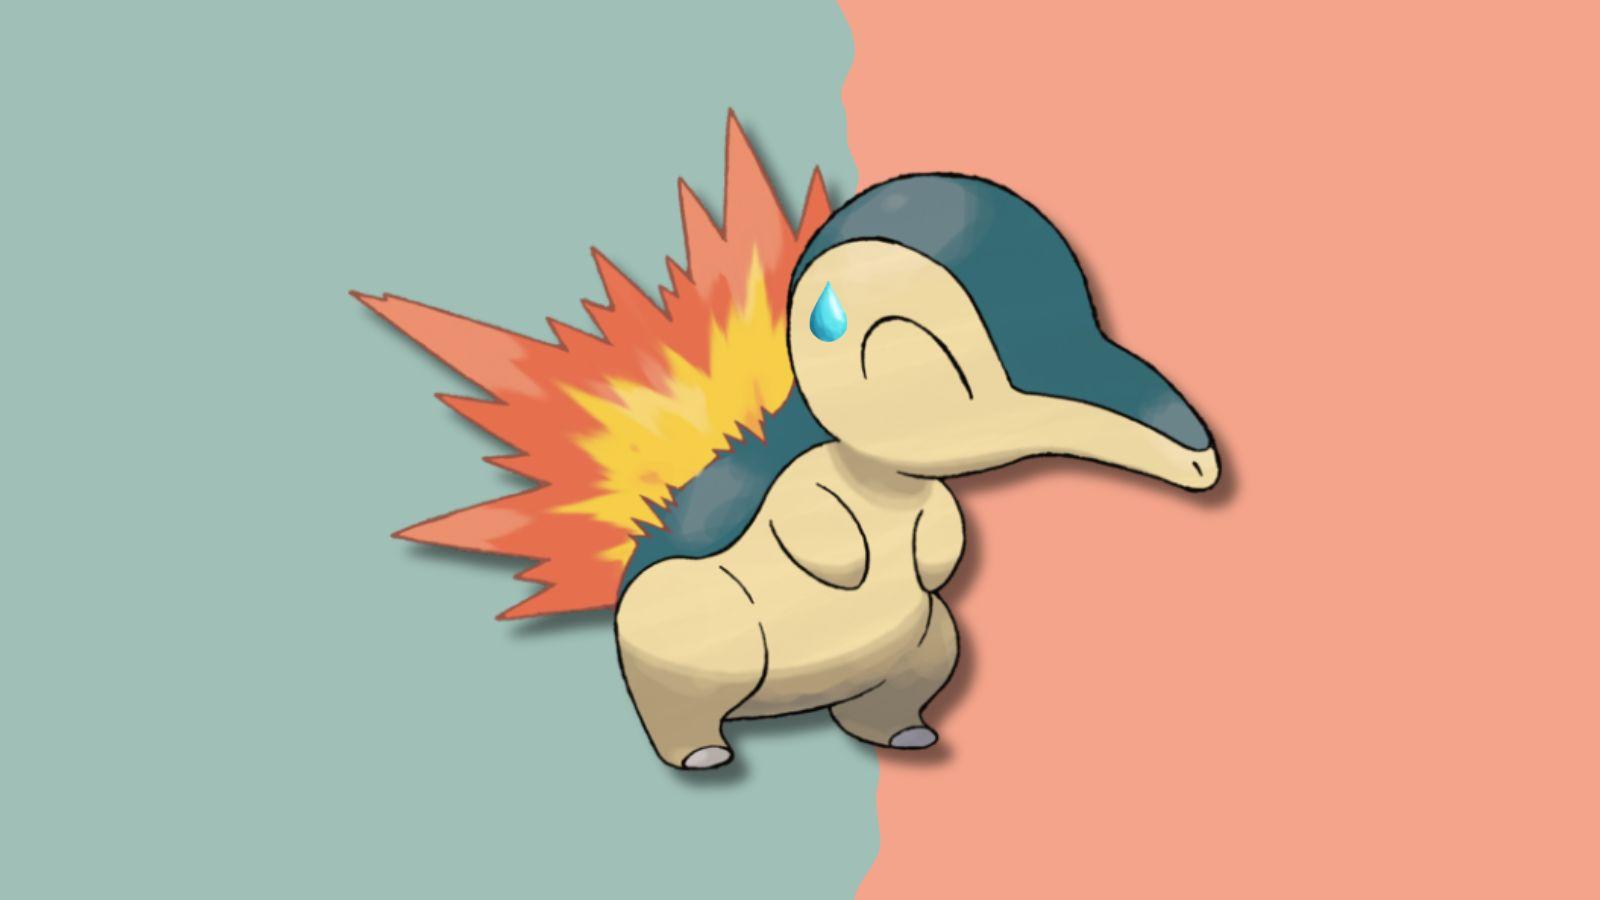 Cyndaquil with a torn paper background.